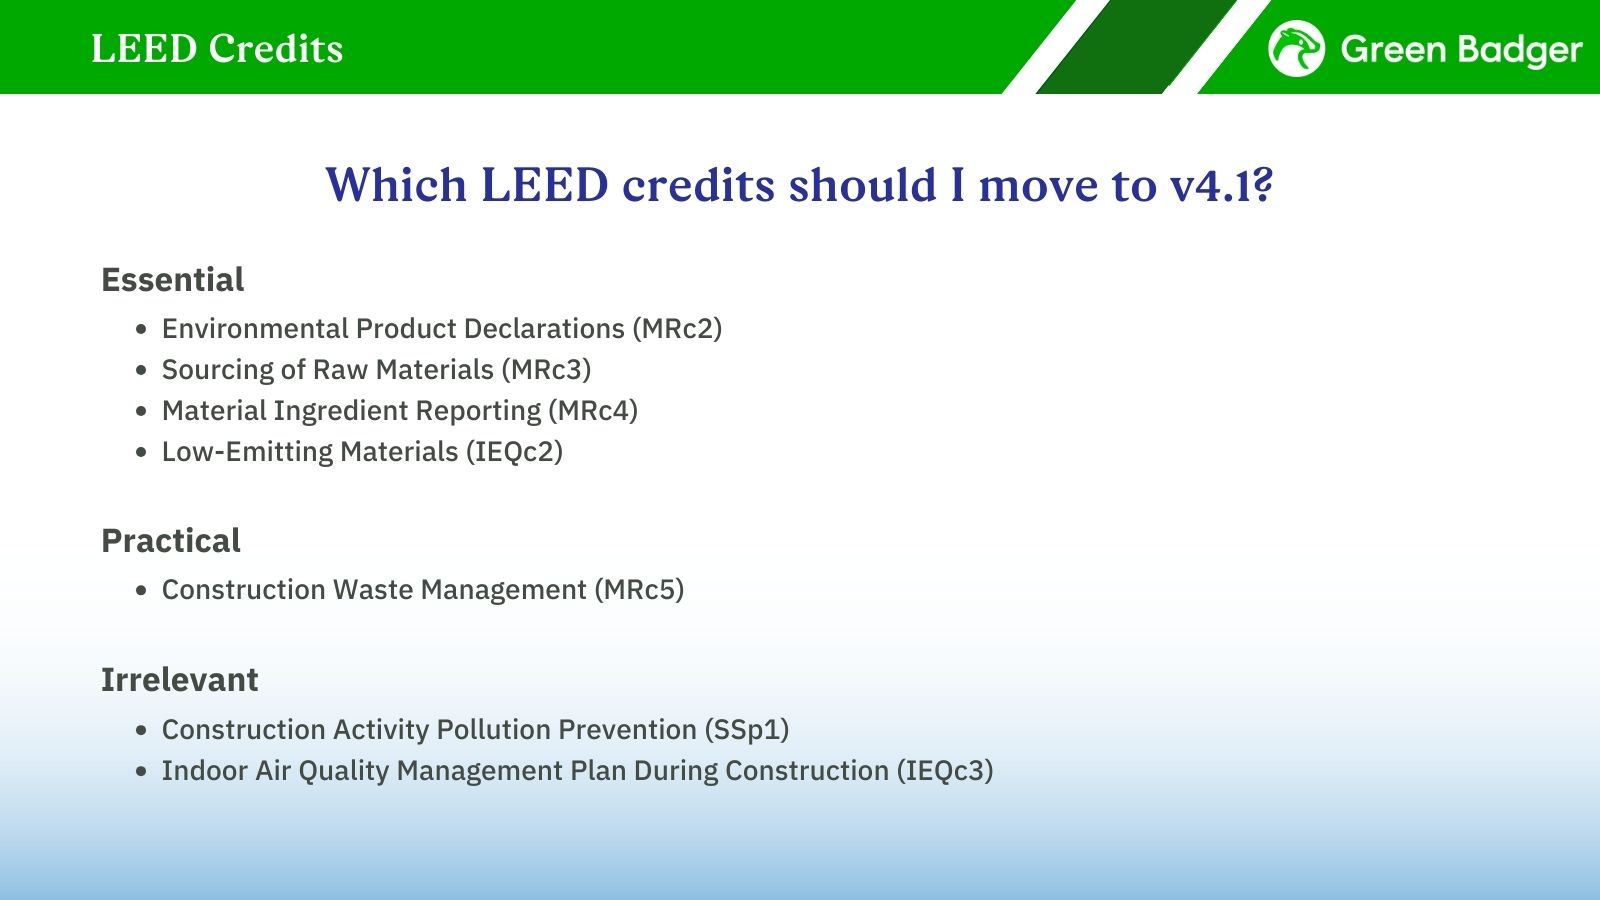 What LEED credits should you change to v4.1?